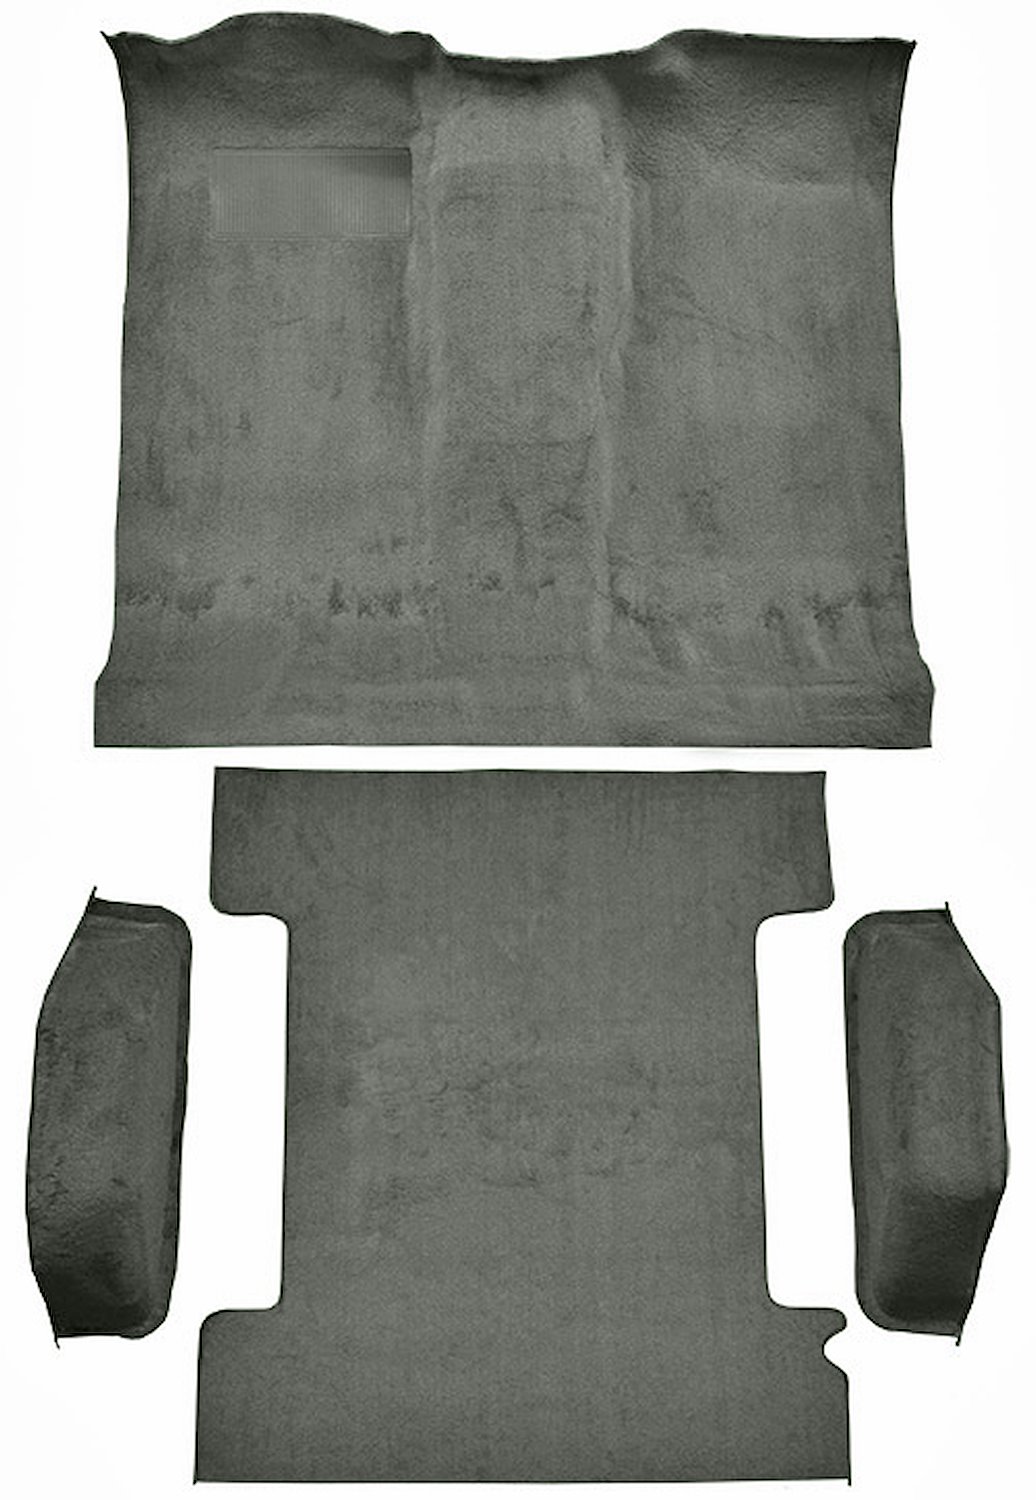 Molded Cut Pile Passenger and Cargo Area Carpet for 1974-1977 Chevy Blazer, GMC Jimmy [OE-Style Jute Backing, 4-Piece, Silver]